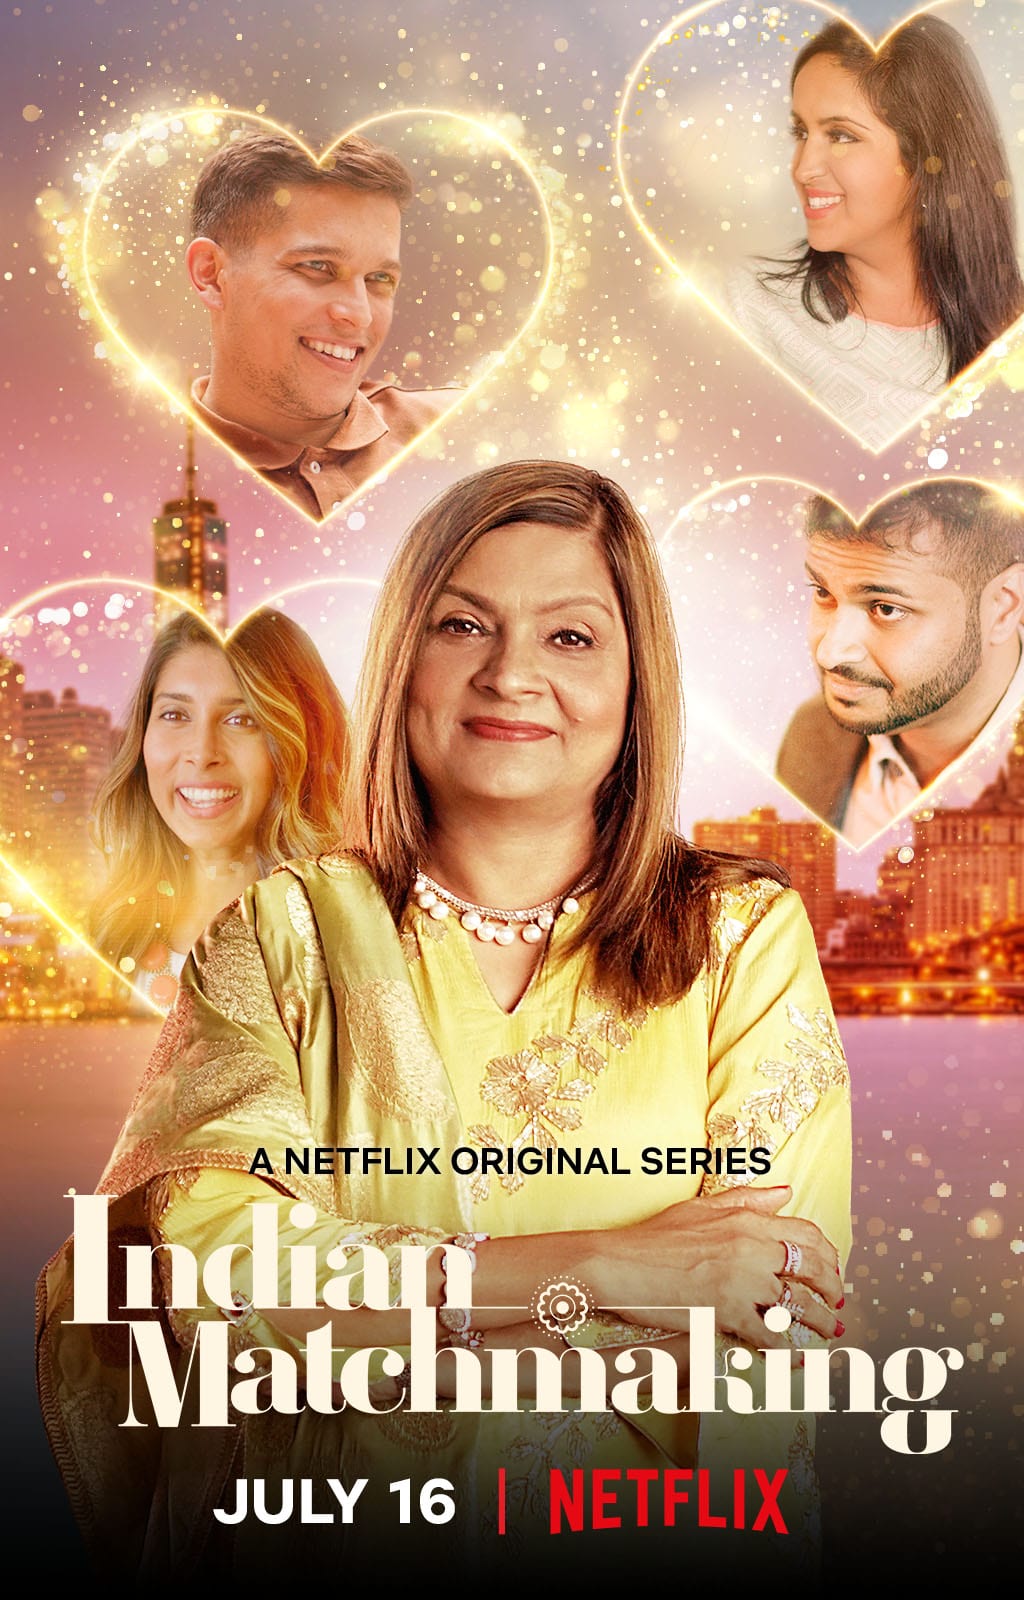 What Pisses Me Off: The Glorification Of Shadism & Classism On The Netflix New Show "Indian Matchmaking": Matchaker Simi Taparia. Photo Credit: Netflix